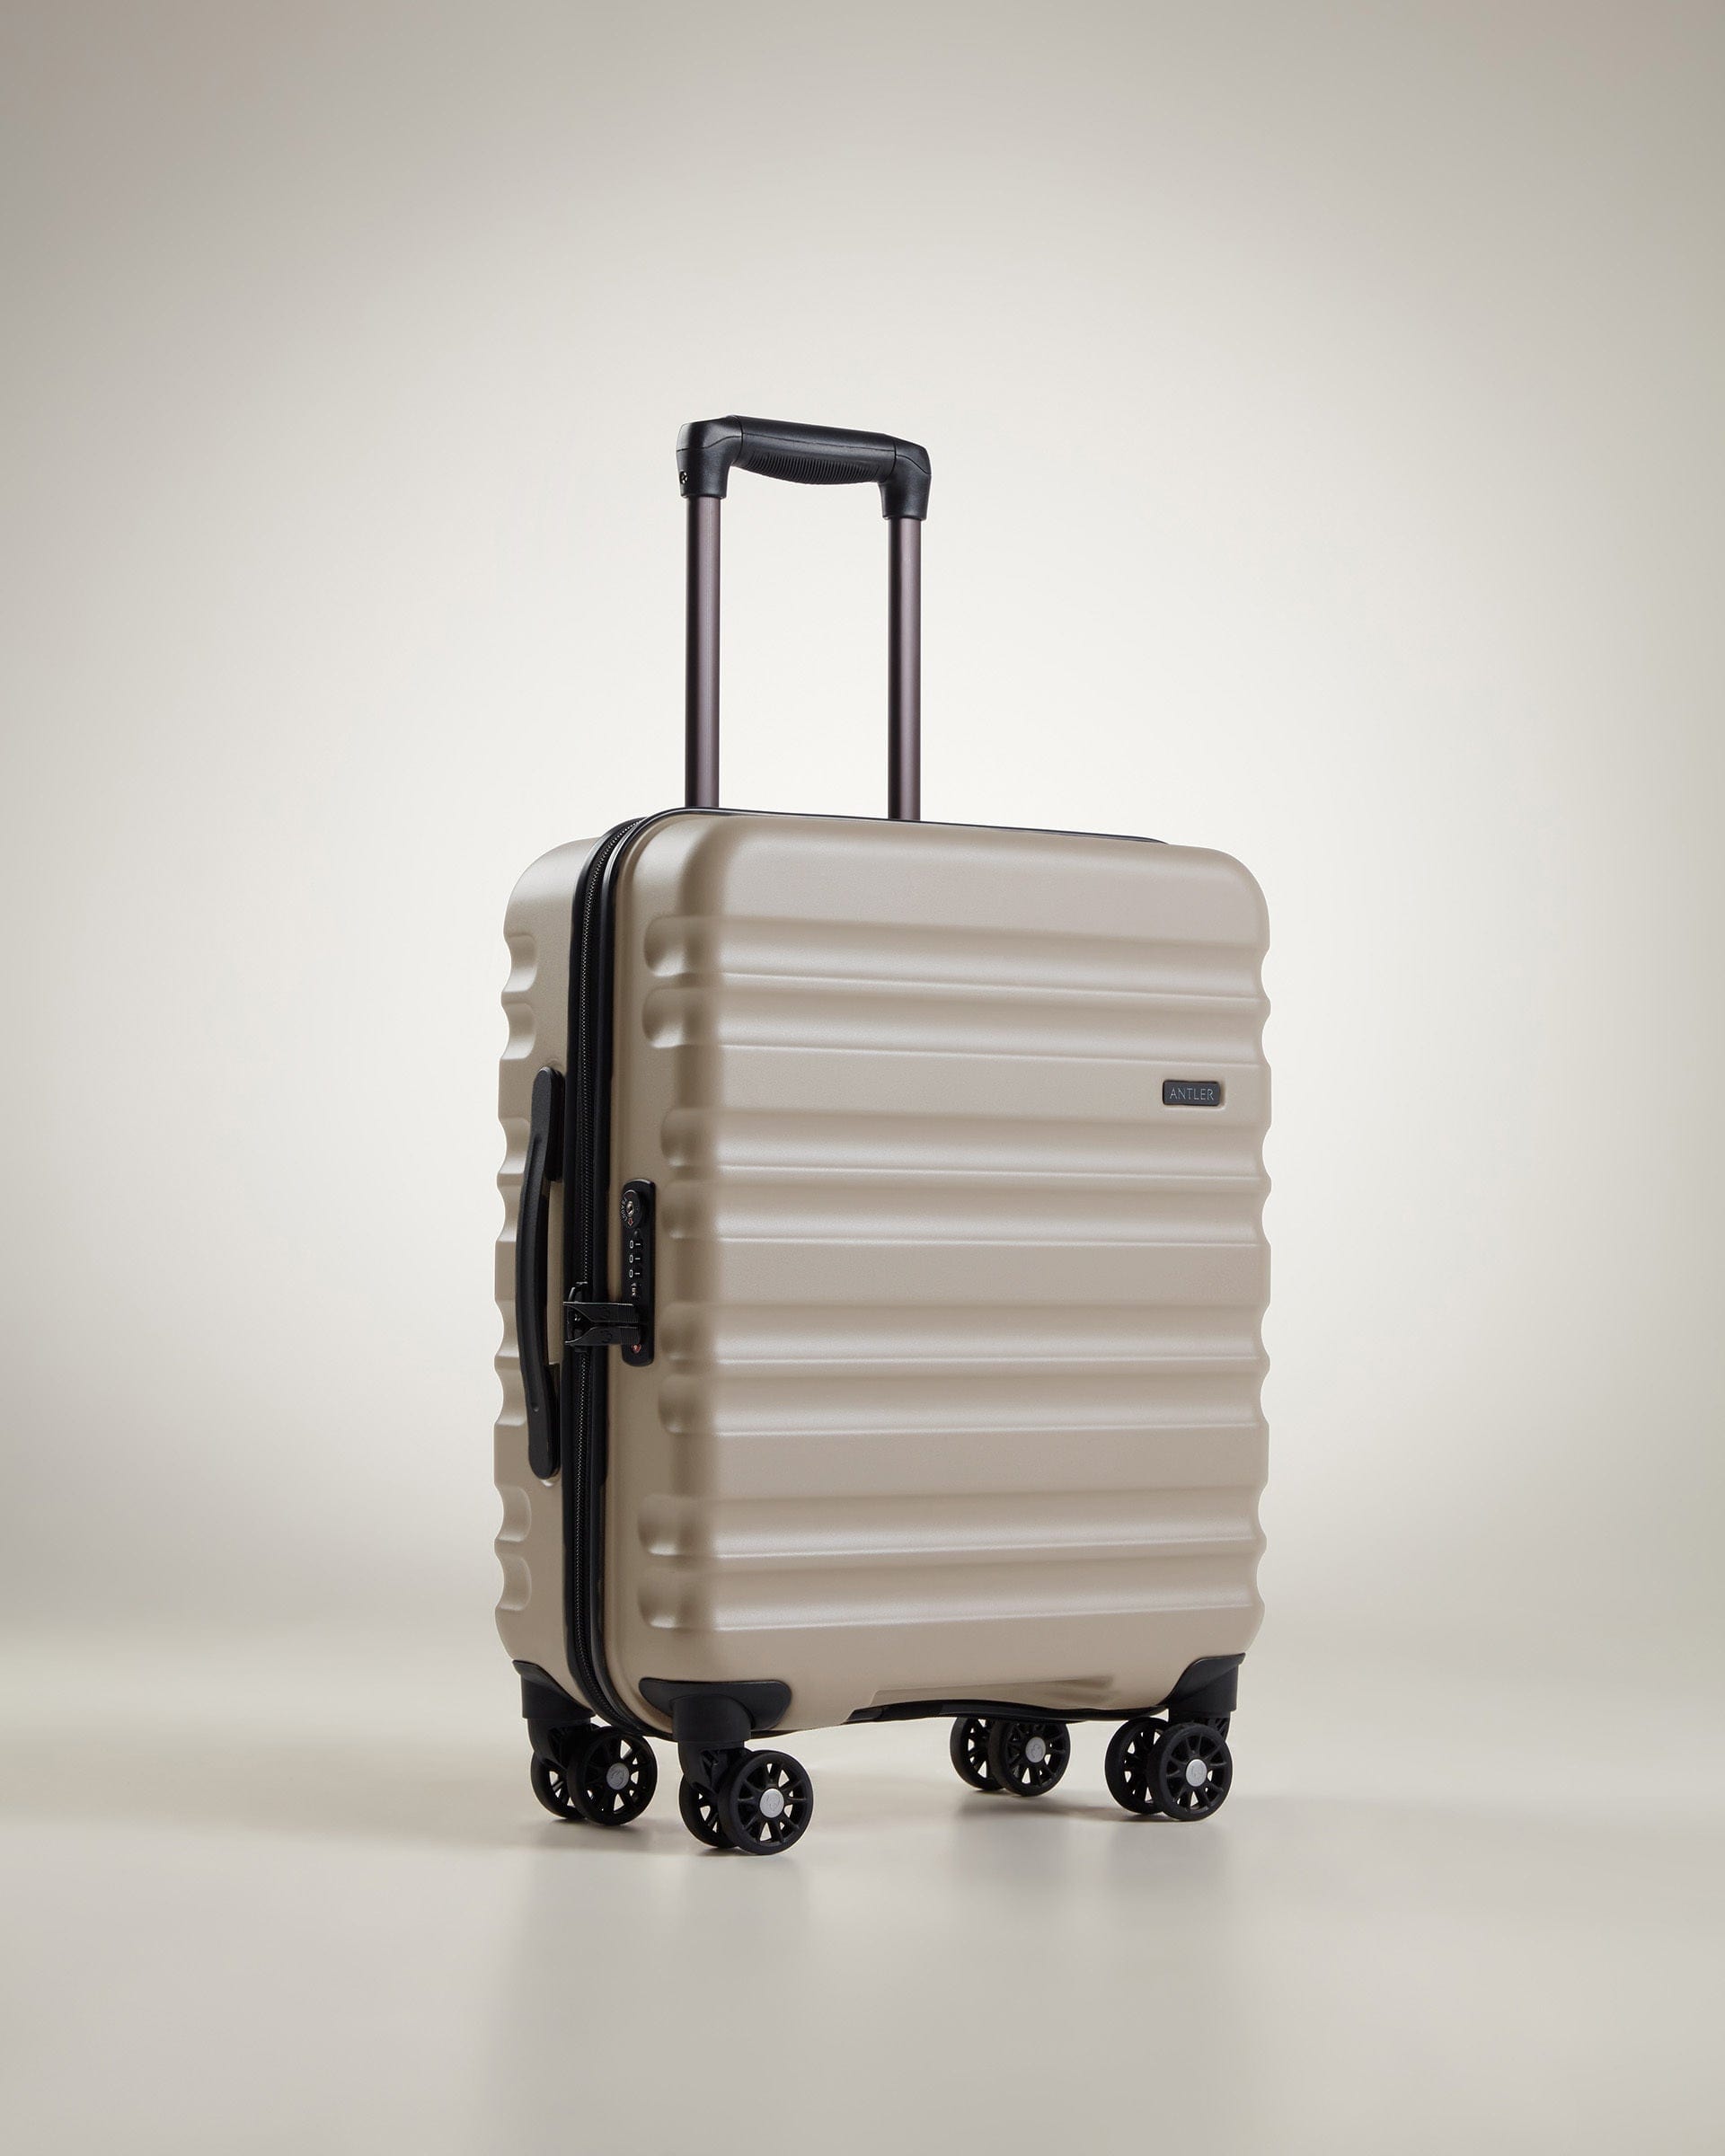 View Antler Clifton Expandable Cabin Suitcase In Taupe Size 55cm x 40cm x 20cm information